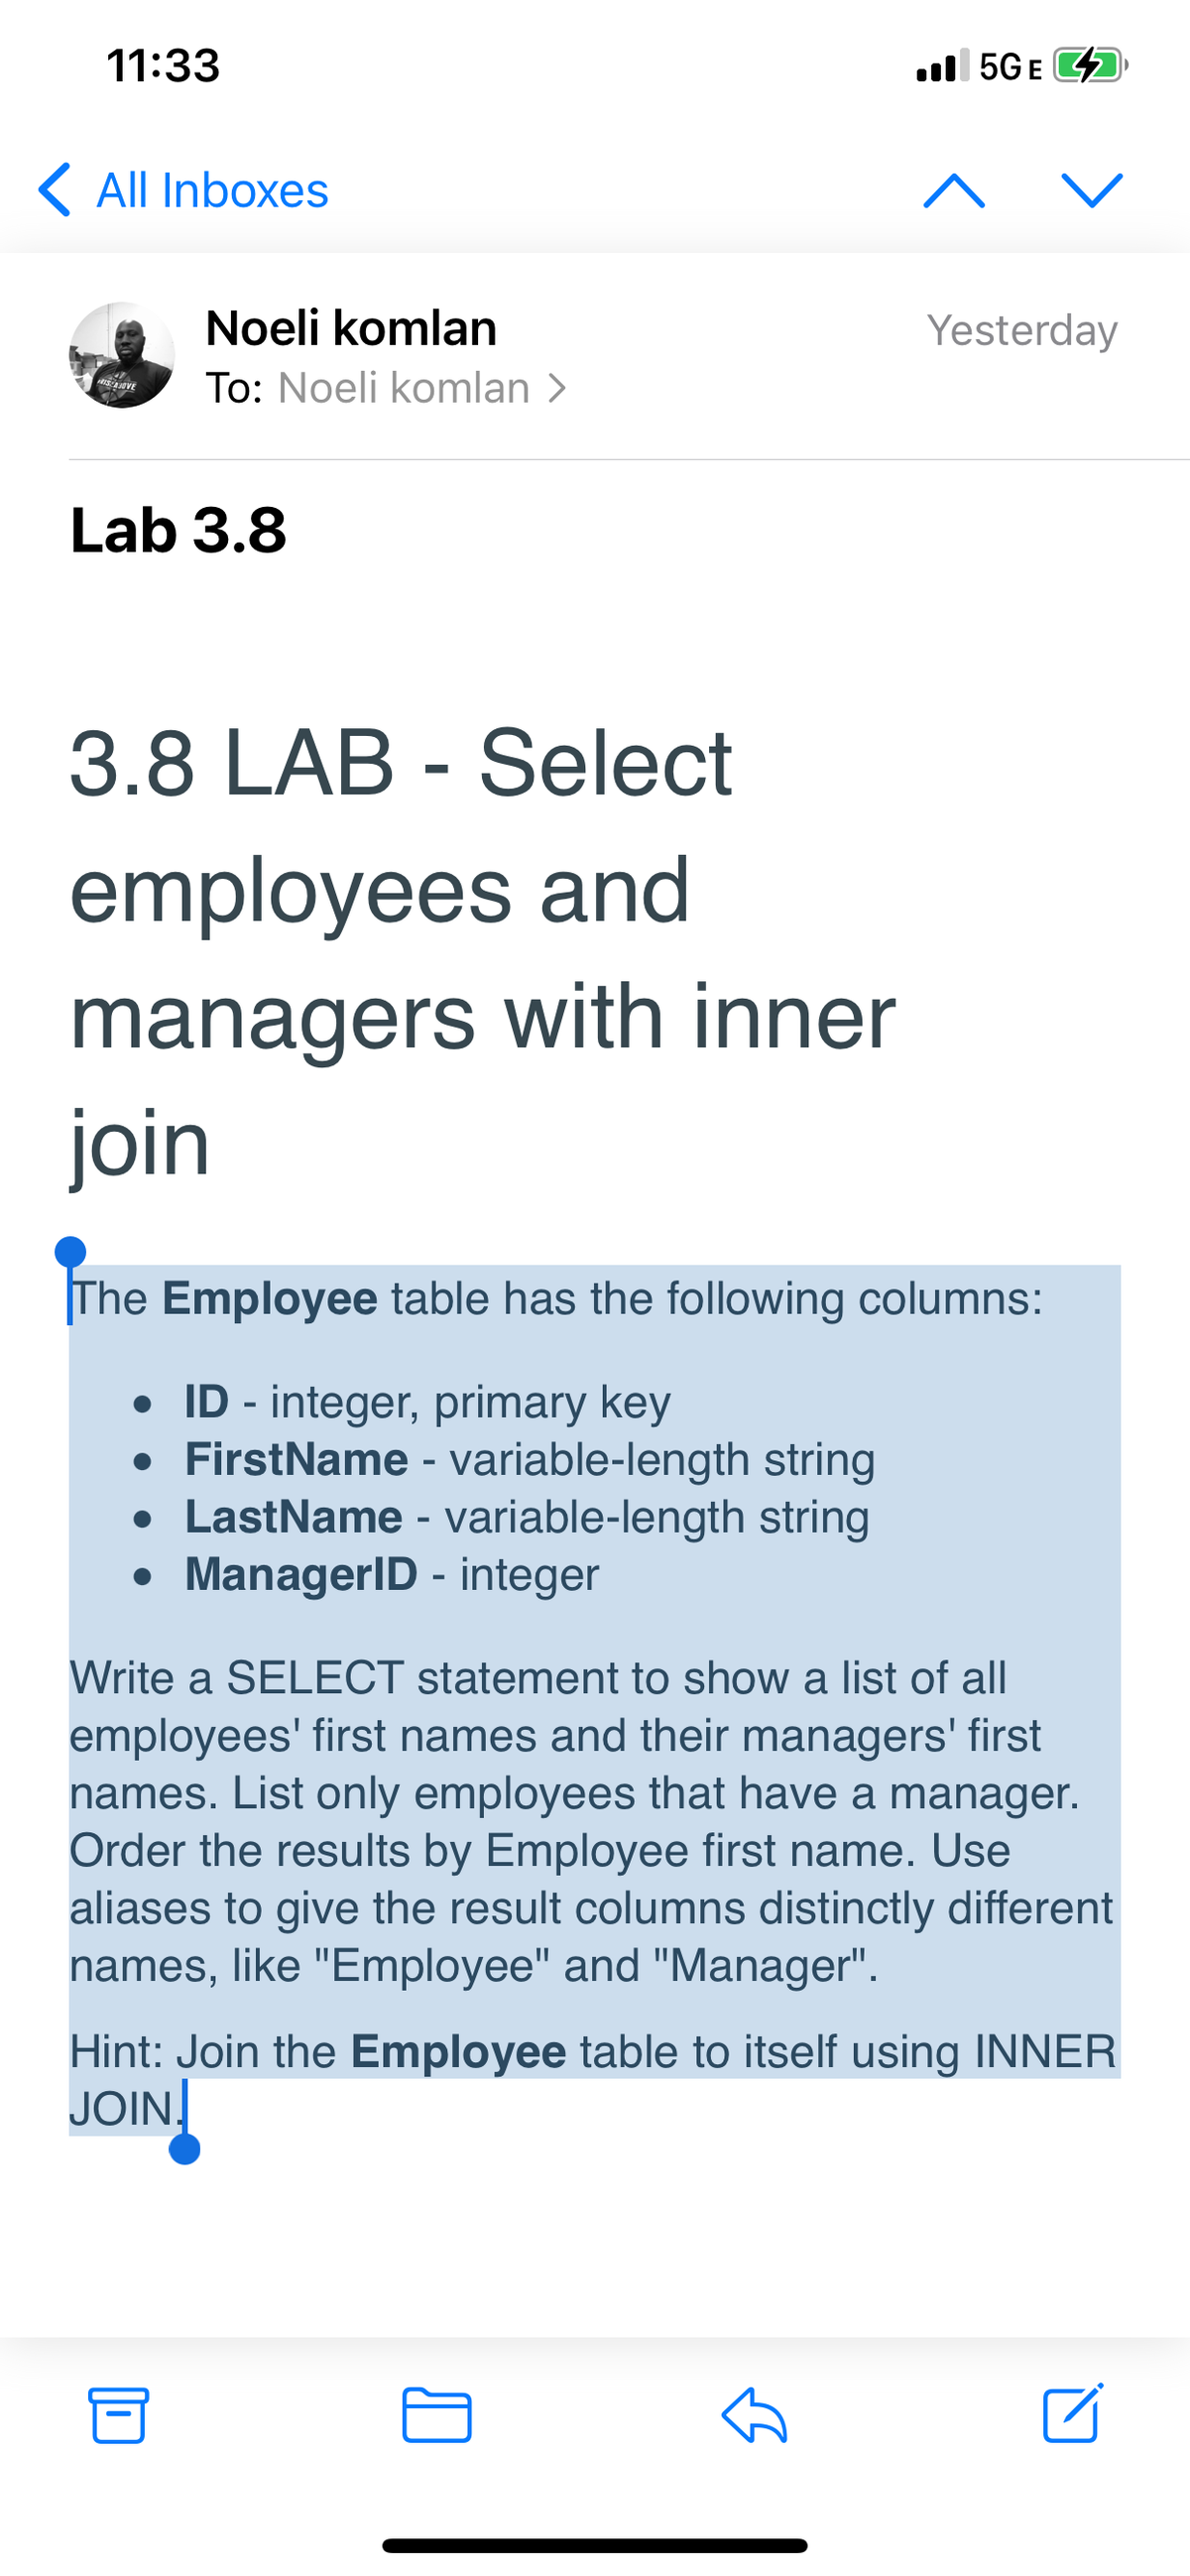 11:33
ull 5GE 4
K All Inboxes
Noeli komlan
Yesterday
To: Noeli komlan >
Lab 3.8
3.8 LAB - Select
employees and
managers with inner
join
The Employee table has the following columns:
• ID - integer, primary key
• FirstName - variable-length string
• LastName - variable-length string
• ManagerID - integer
/rite a SELECT statement to show a list of all
employees' first names and their managers' first
names. List only employees that have a manager.
Order the results by Employee first name. Use
aliases to give the result columns distinctly different
names, like "Employee" and "Manager".
Hint: Join the Employee table to itself using INNER
JOIN.
